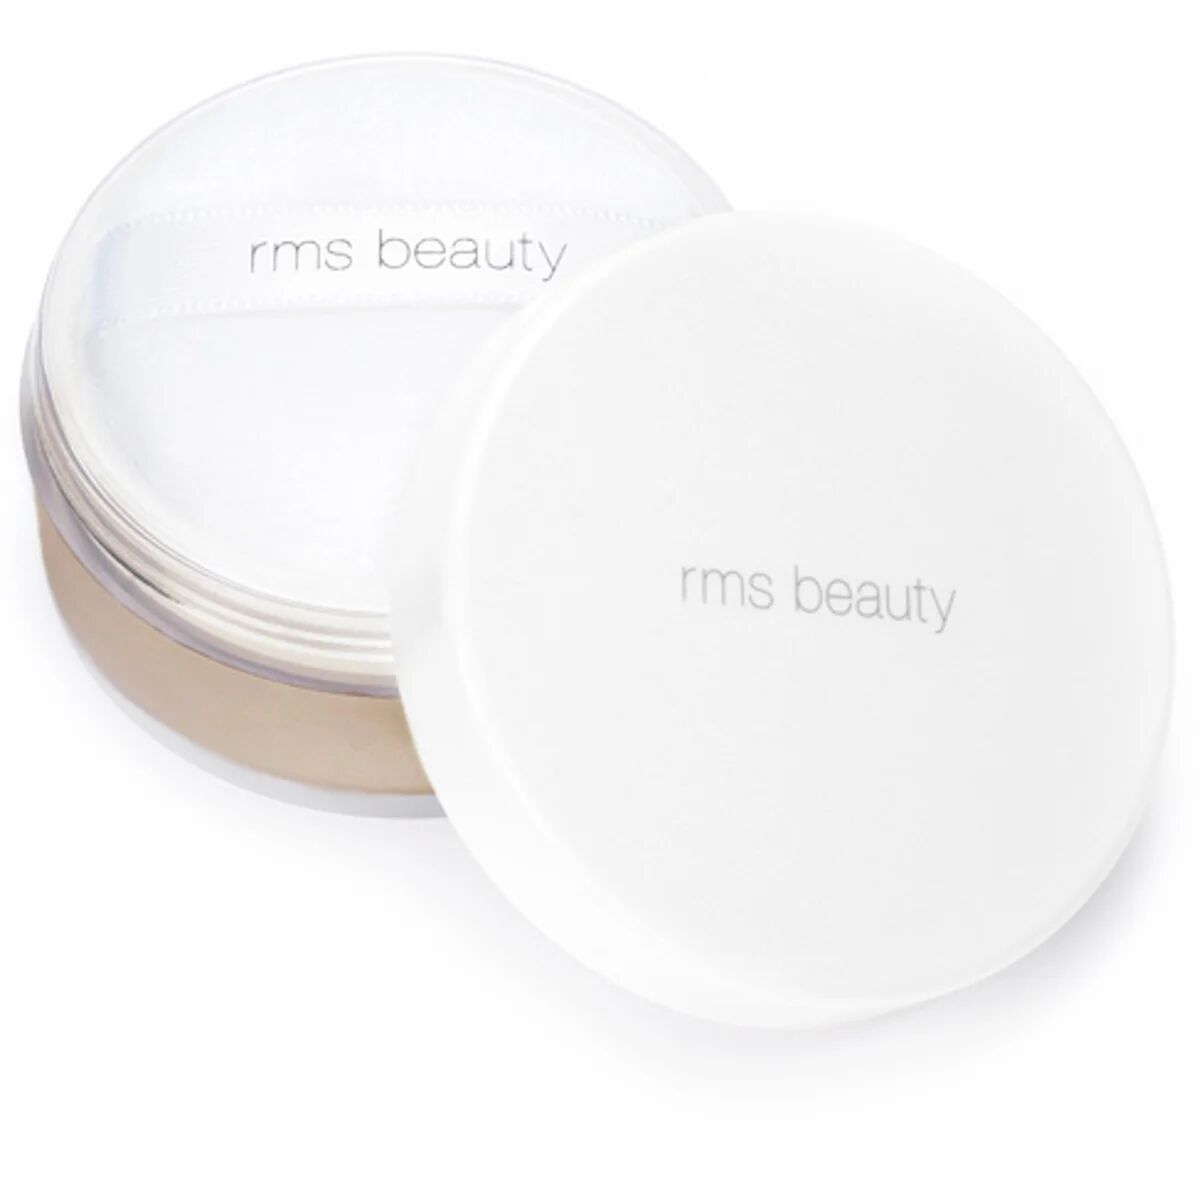 rms beauty tinted UnPowder, 9 g rms beauty Pudder